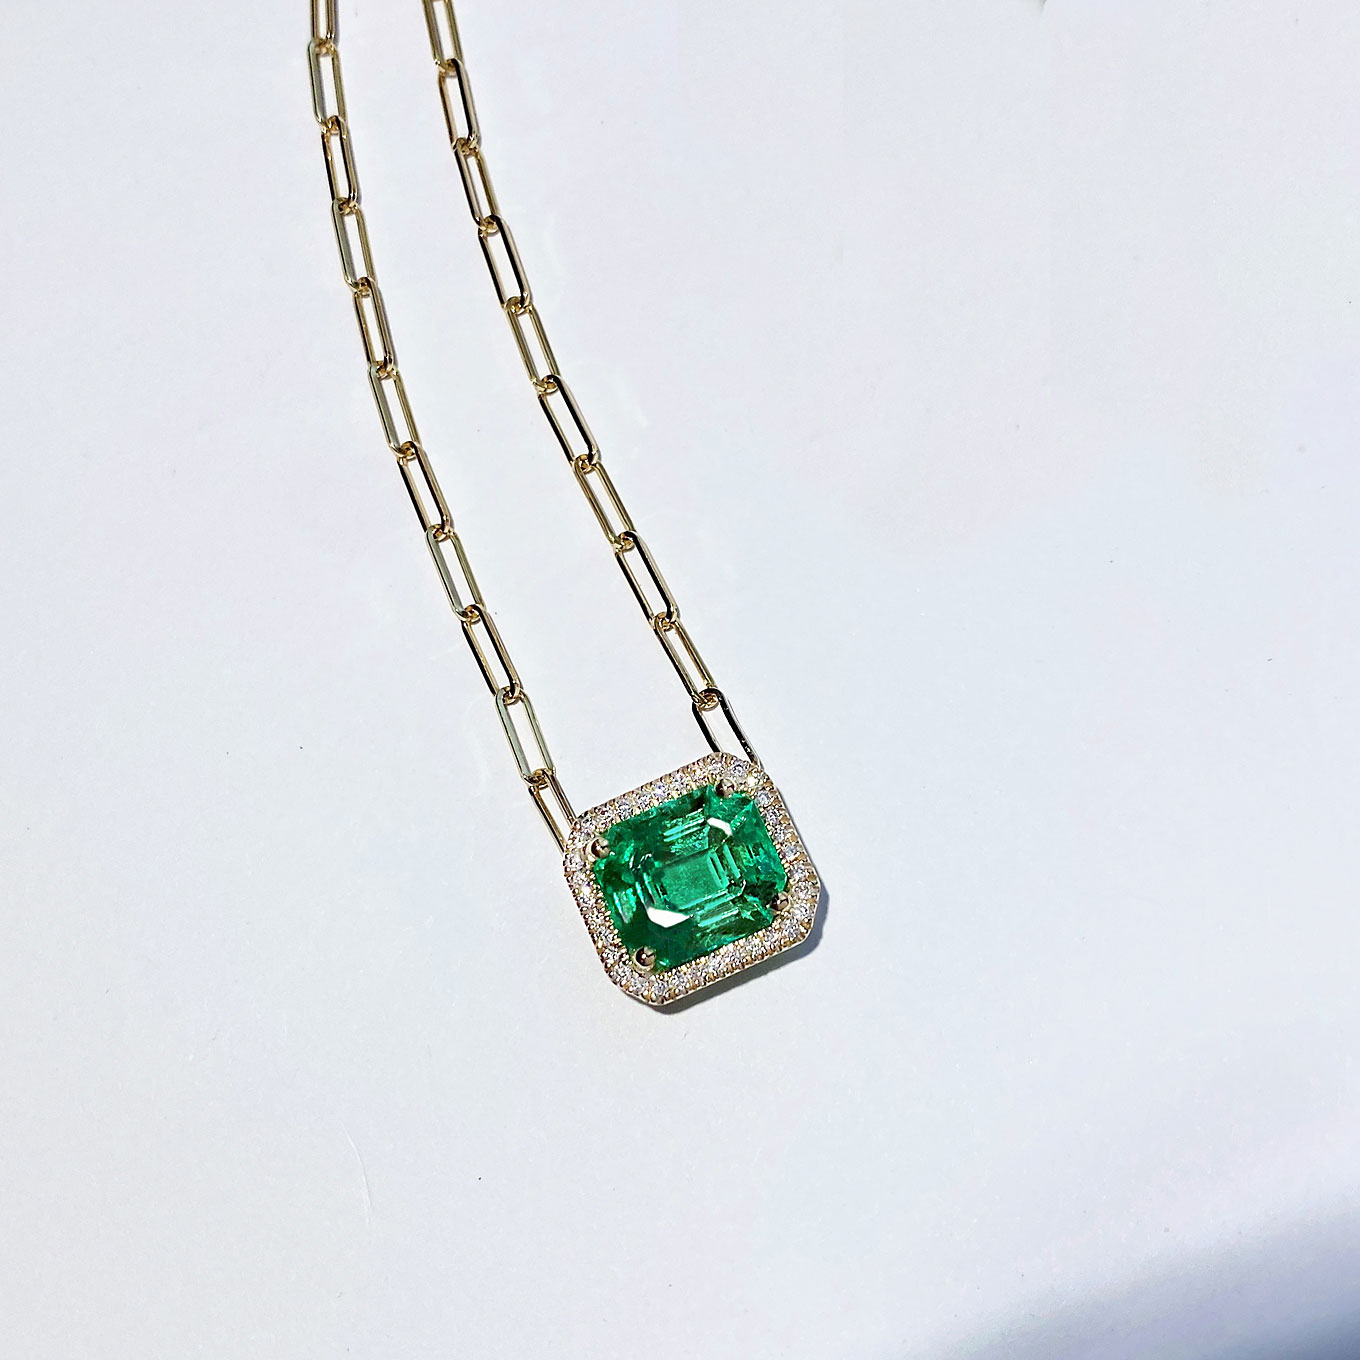 Emerald cut emerald 1.89 cts and diamond 0.13ct frame pendant in yellow gold